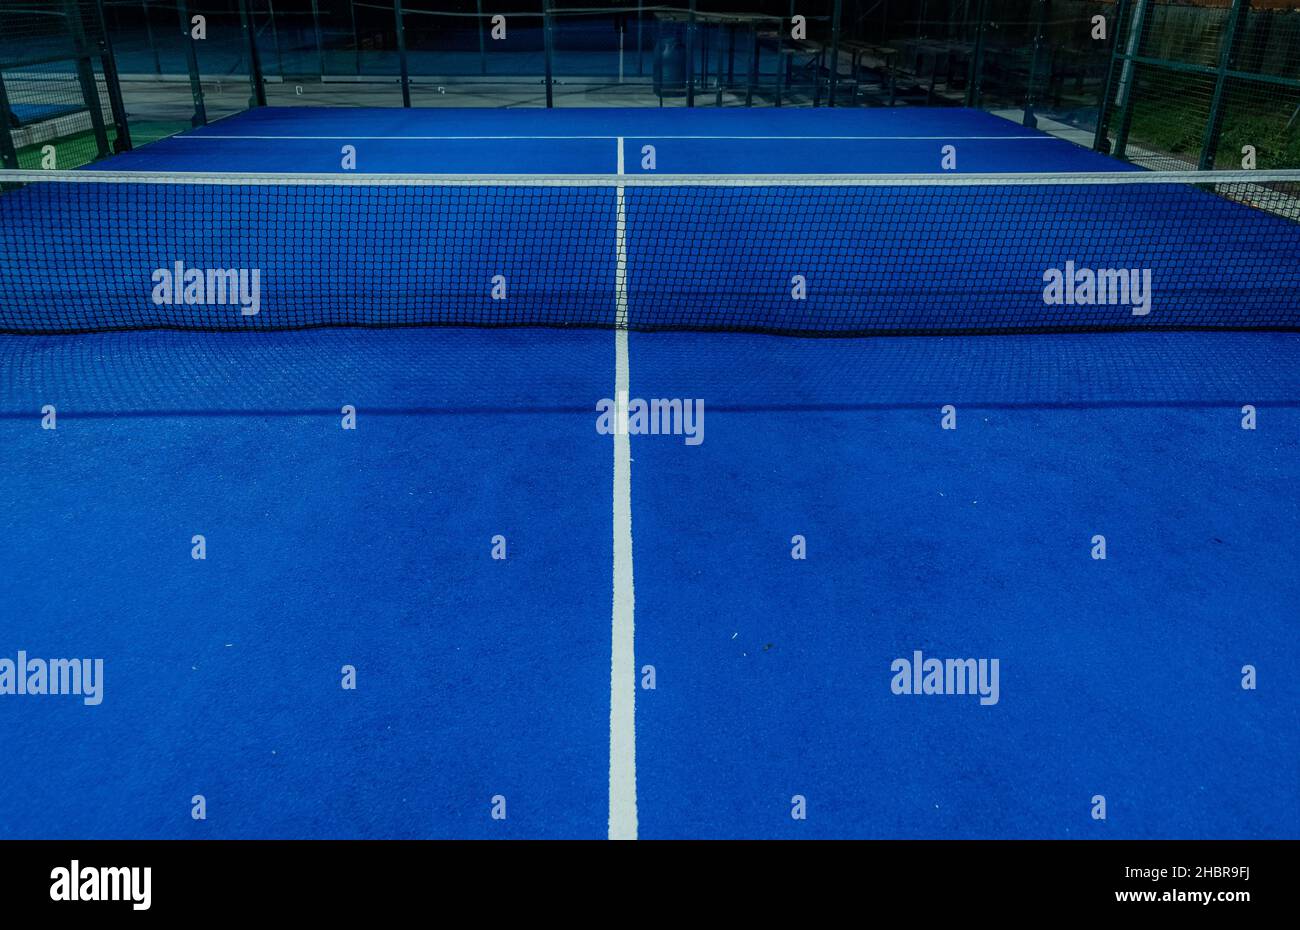 Blue paddle tennis court at night. Racket sports concept, healthy sports. Stock Photo